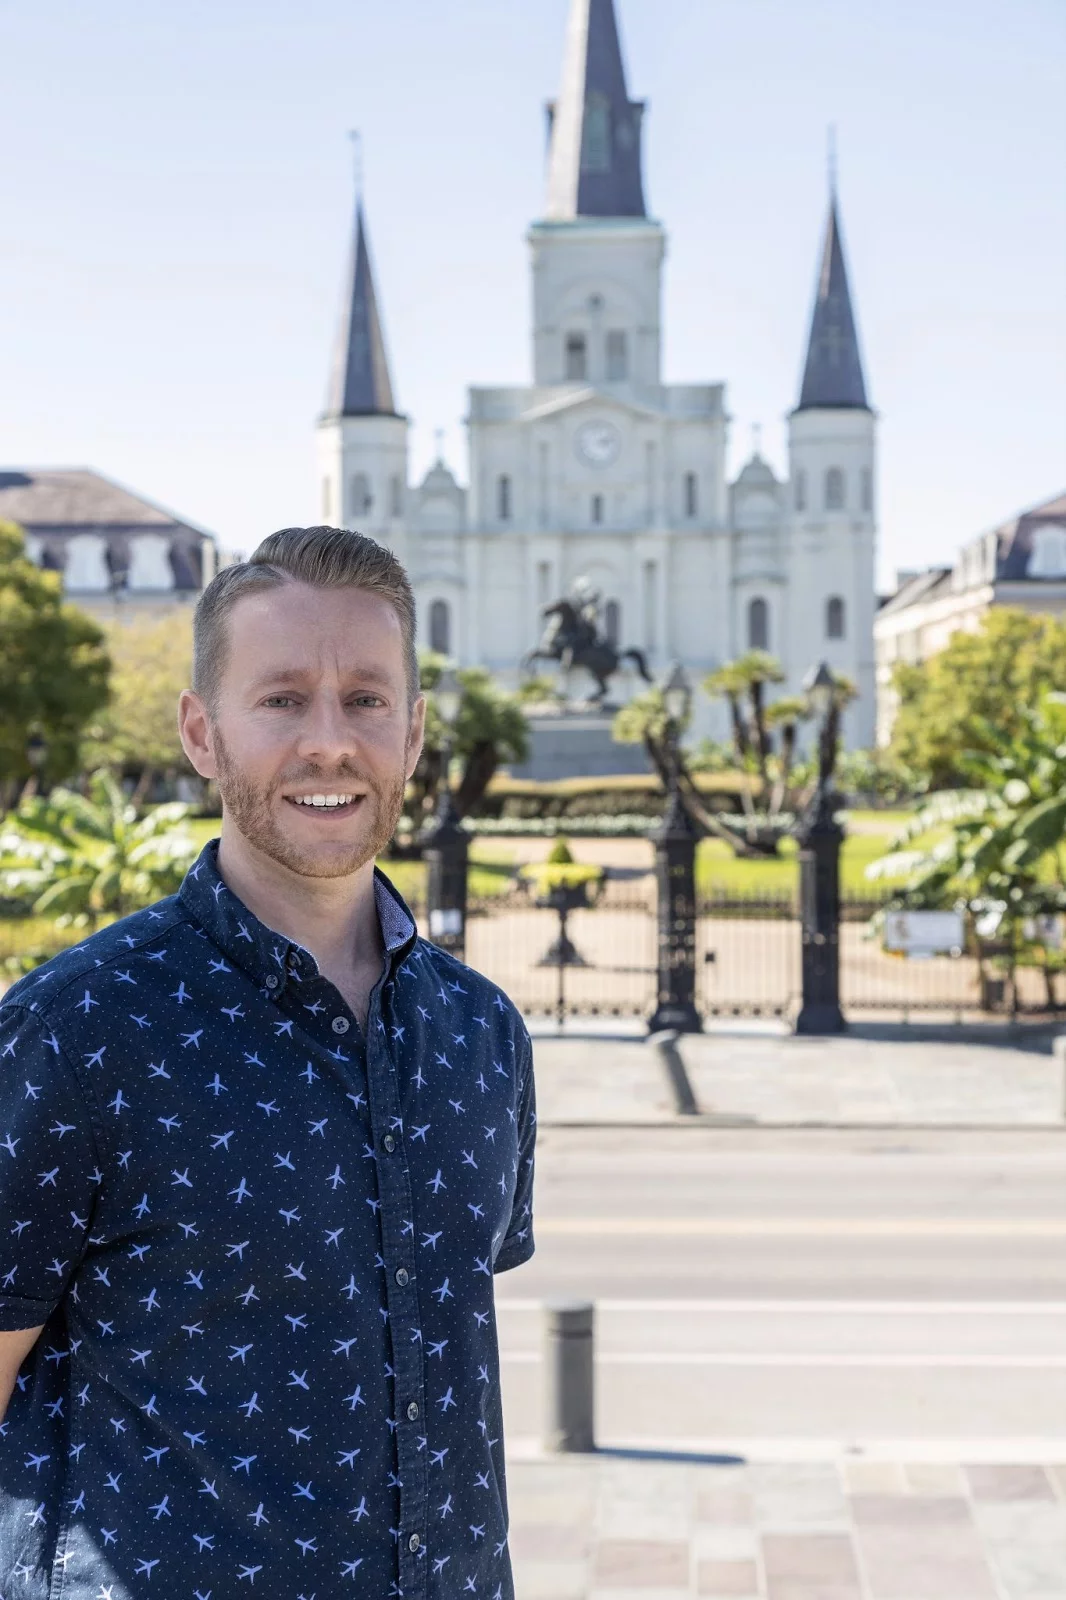 Mike Krass, MKG Marketing’s Owner/Visionary, standing in front of St. Louis Cathedral in the French Quarter of New Orleans | MKG Marketing